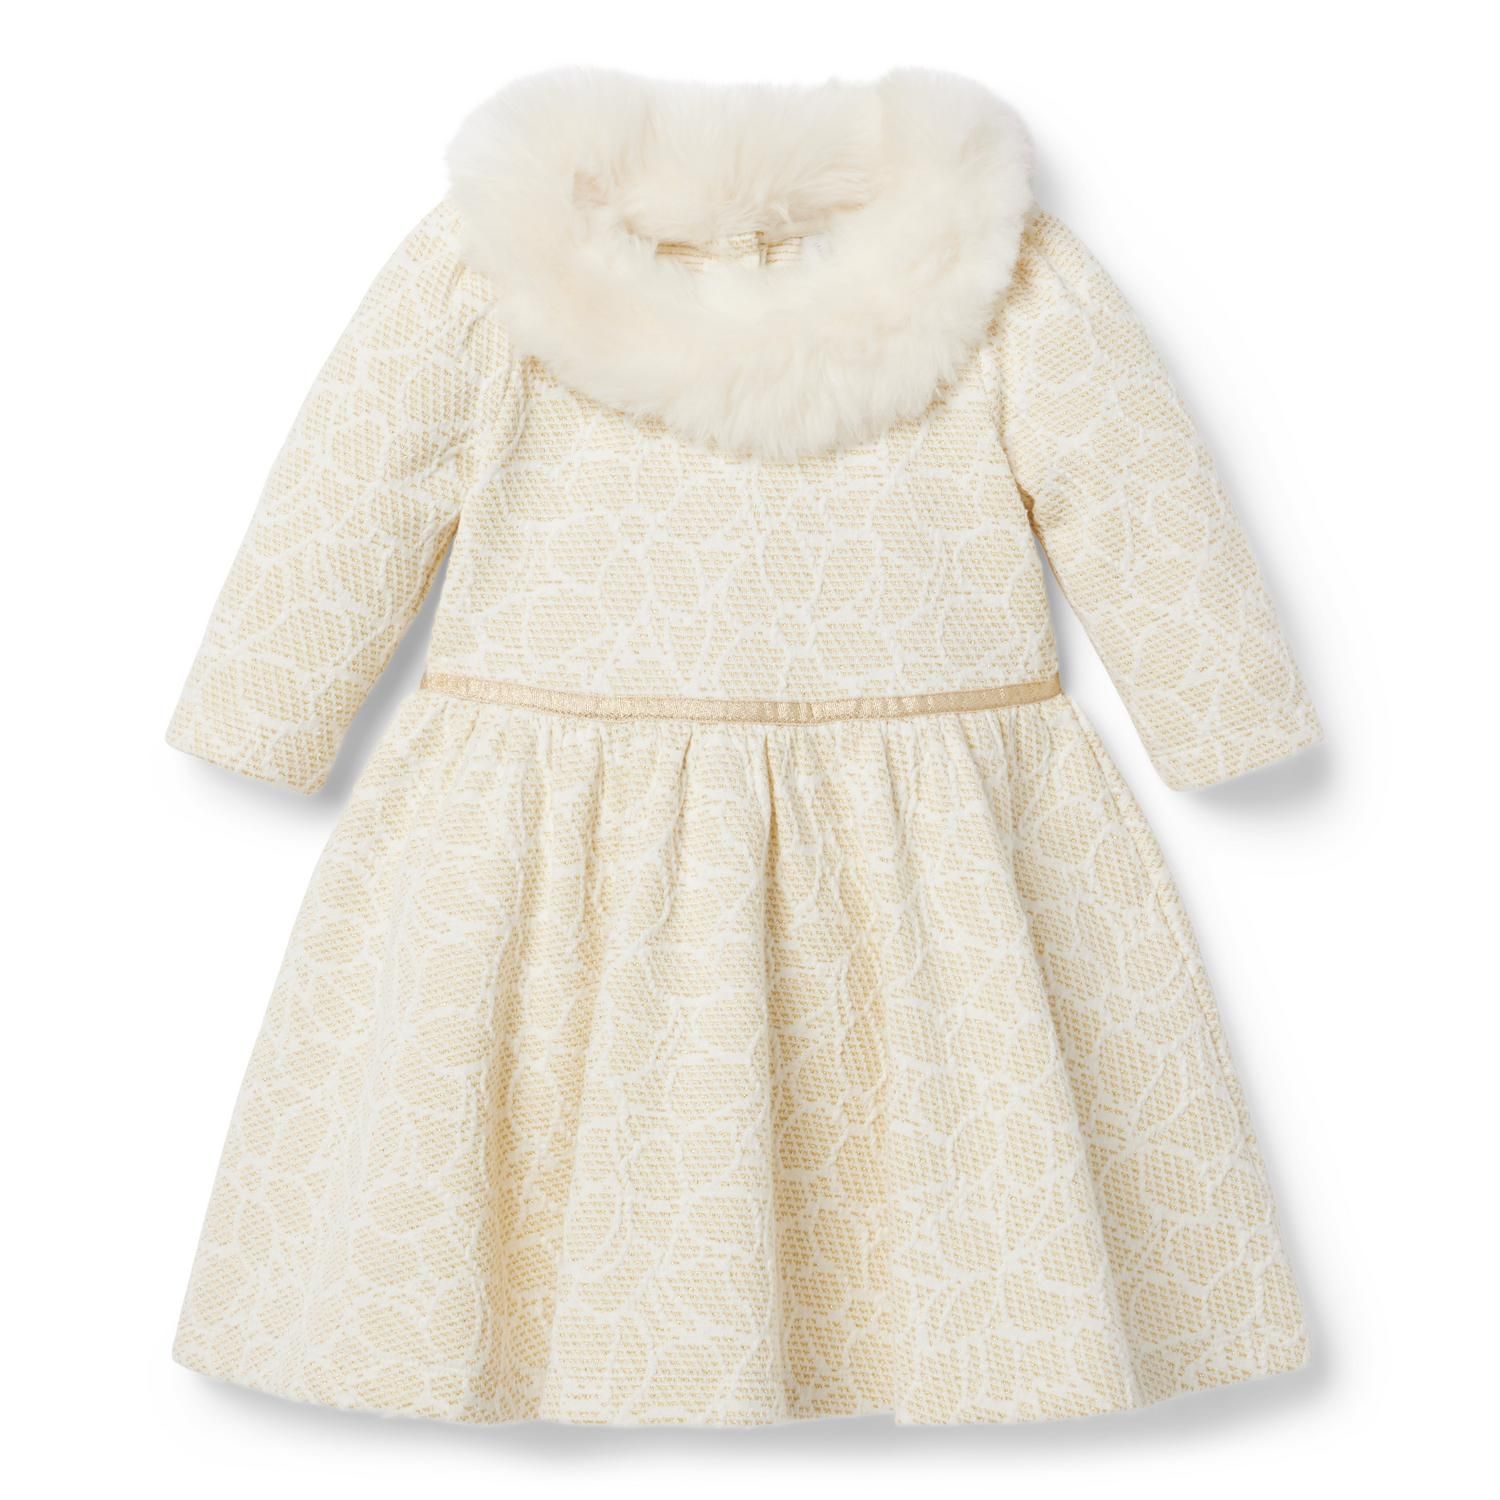 Floral Jacquard Faux Fur Collared Dress | Janie and Jack